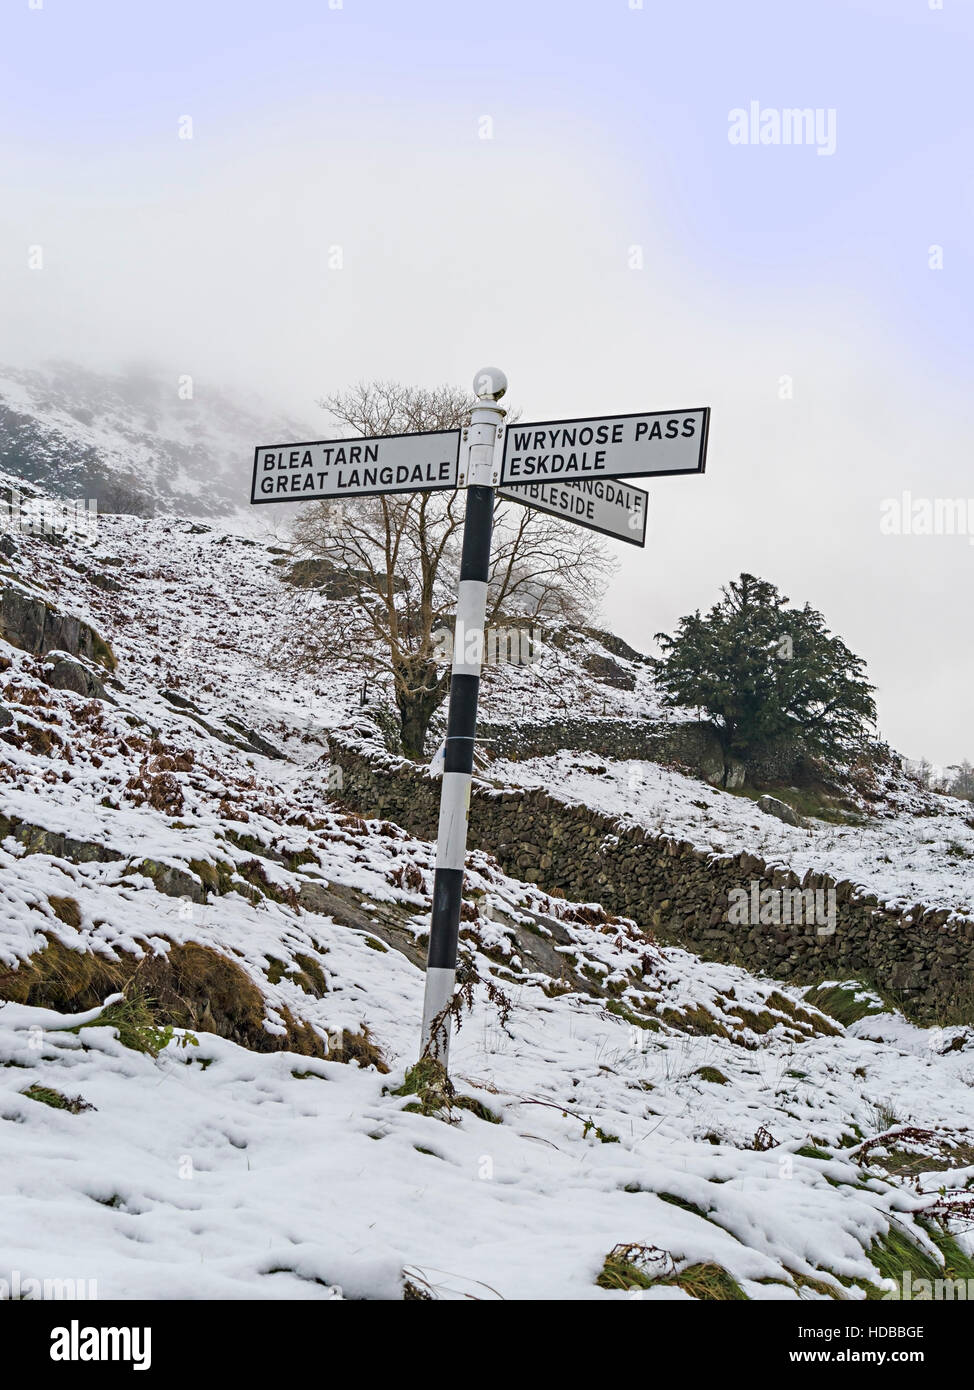 Finger post direction sign in snow Little Langdale, English Lake District, Cumbria, England, UK. Stock Photo